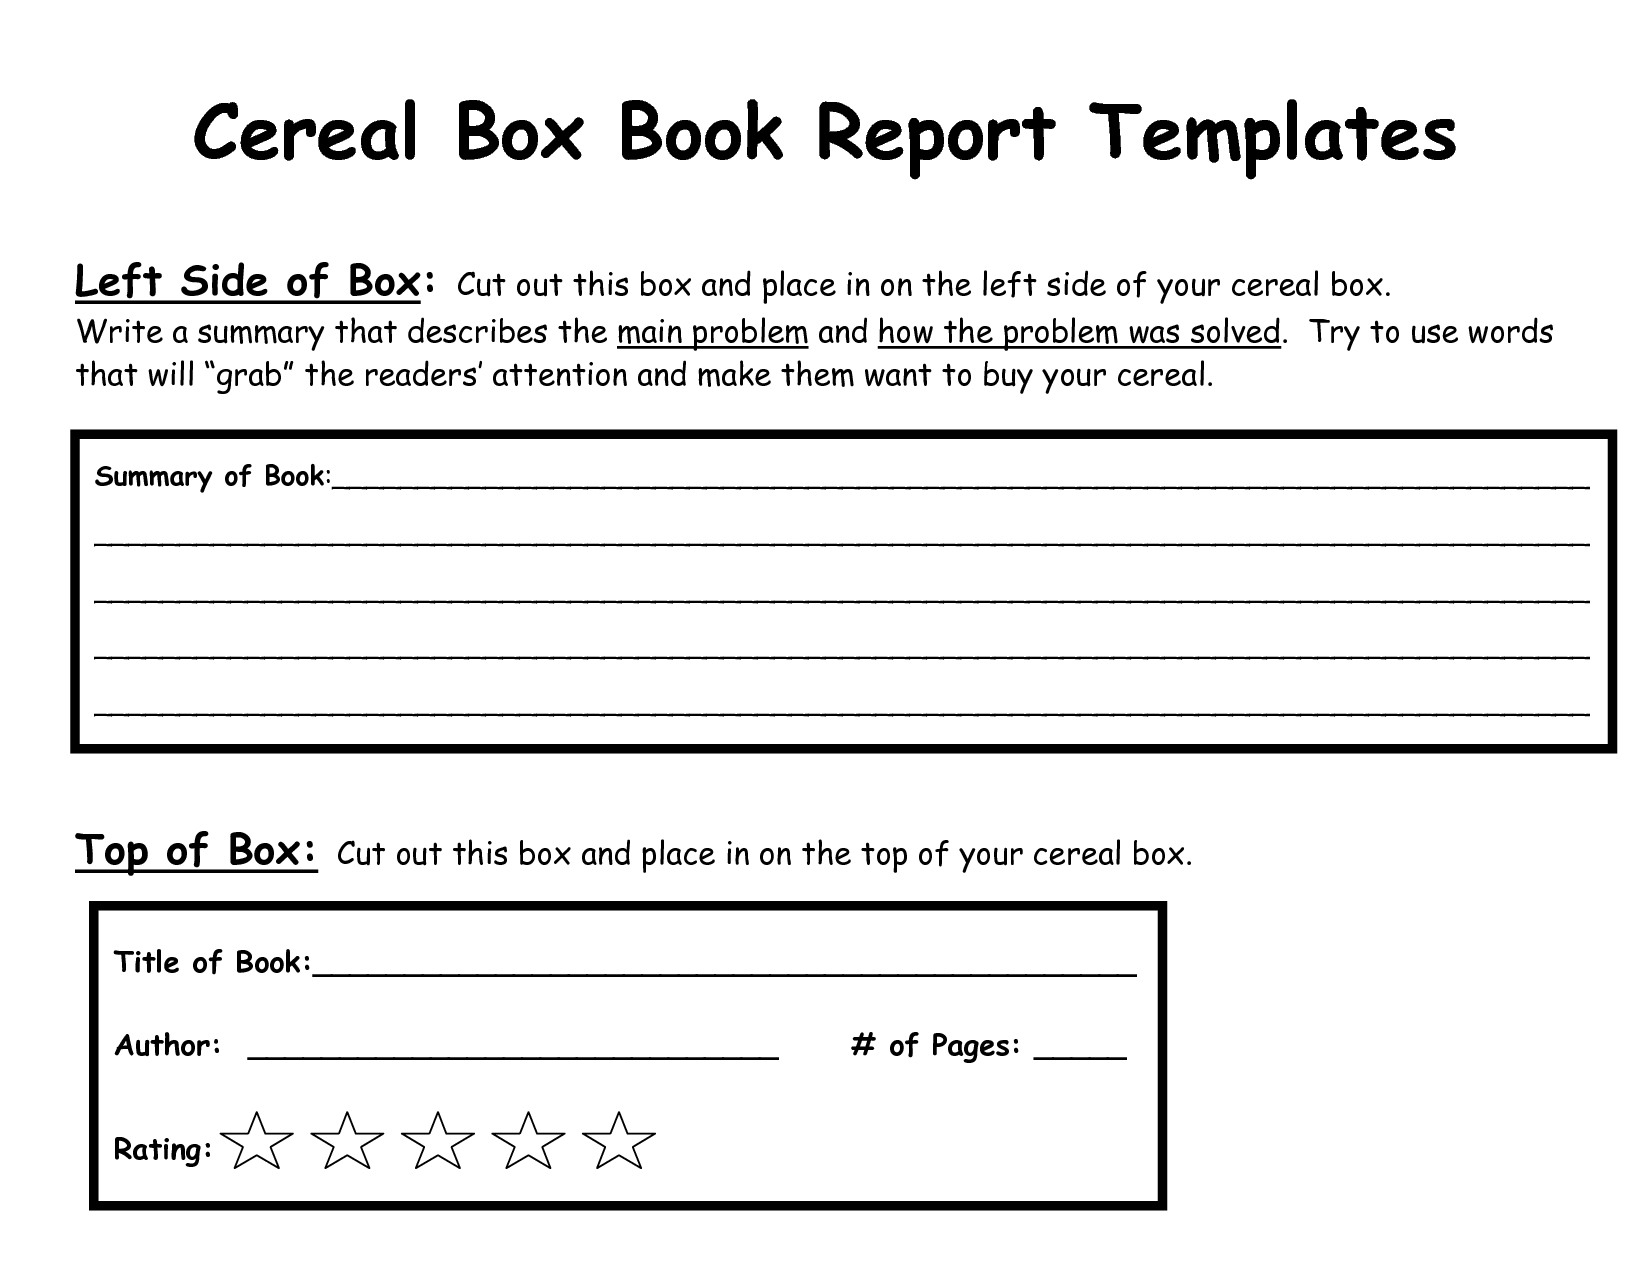 Cereal Box Book Report Template Cereal Box Book Report Book Report Templates Creative Book Report